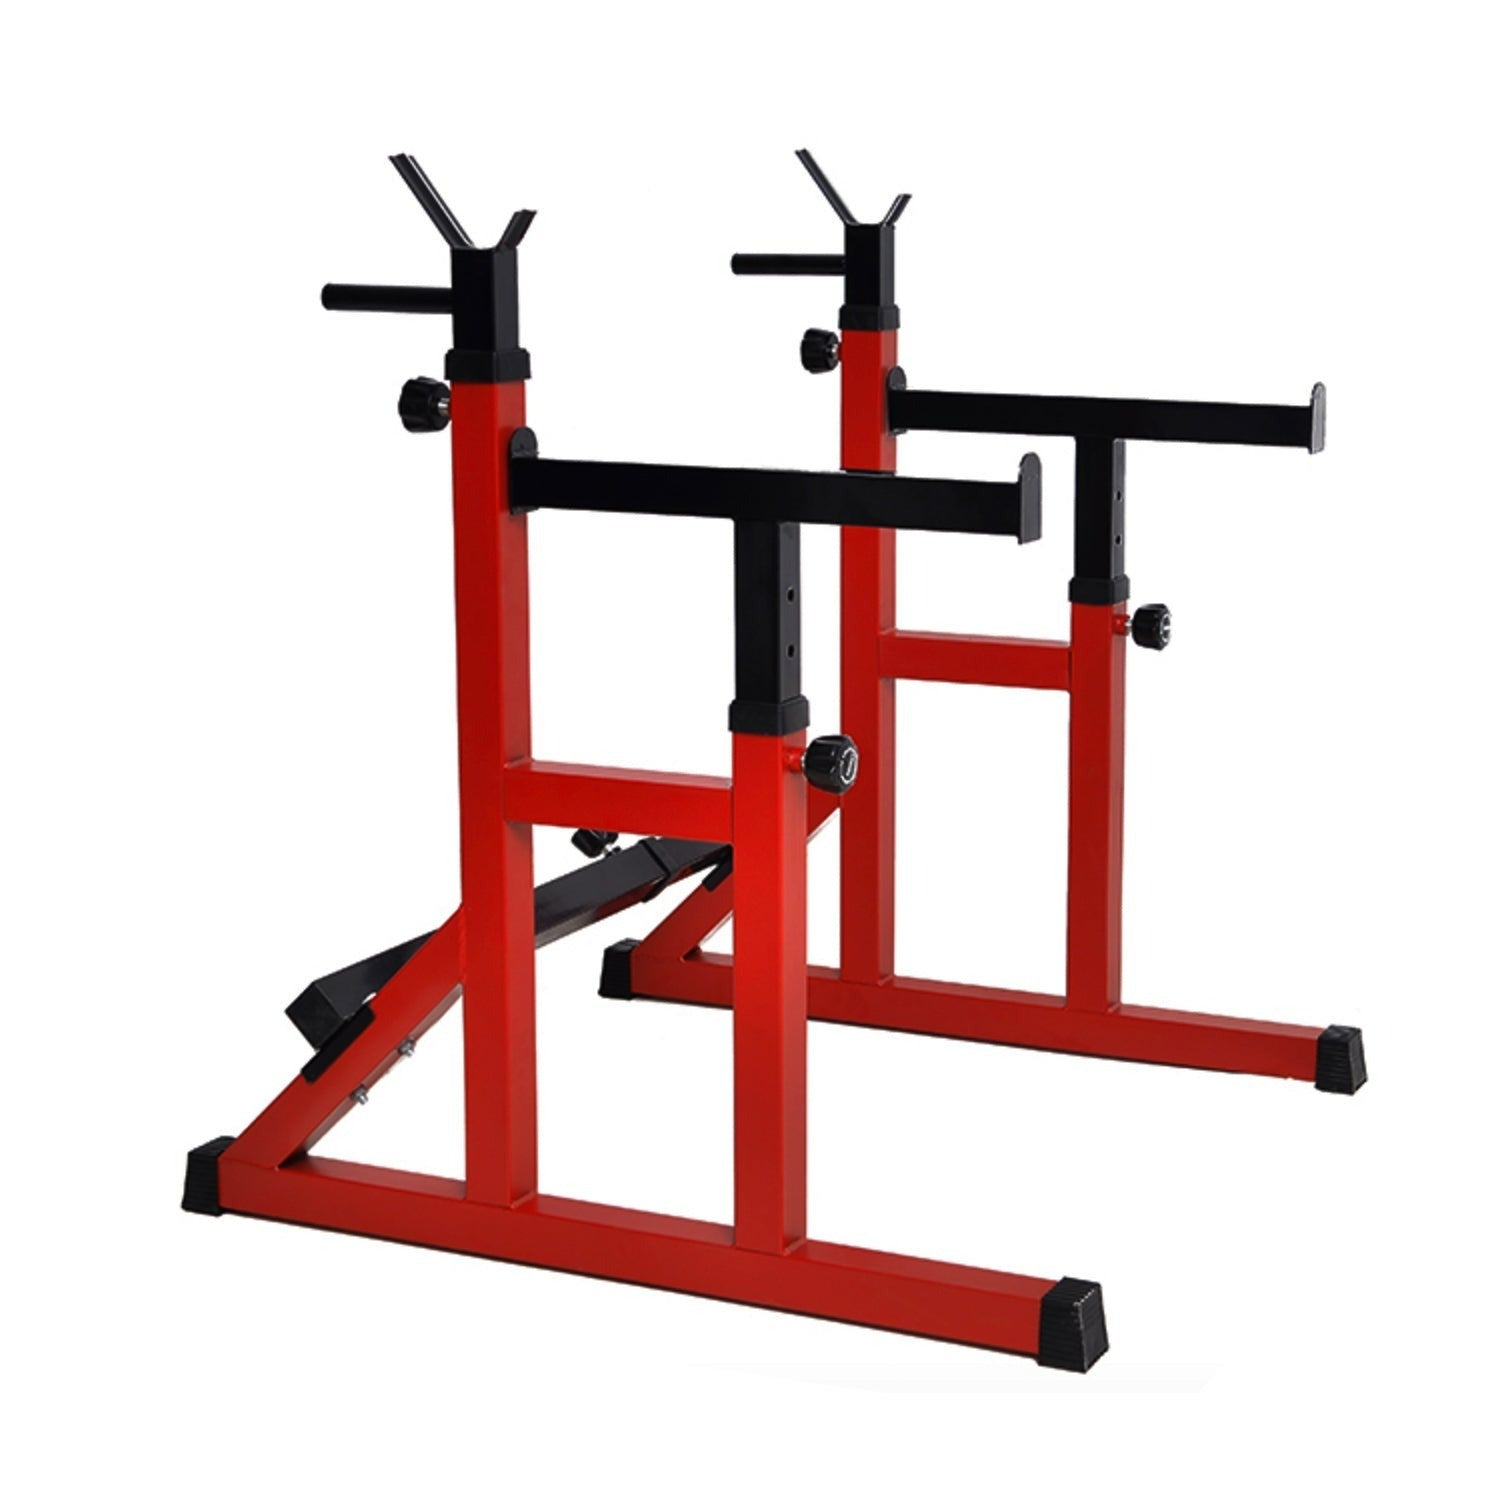 Adjustable Squat Rack Barbell Rack Bench Press Weight Lifting Home Gym